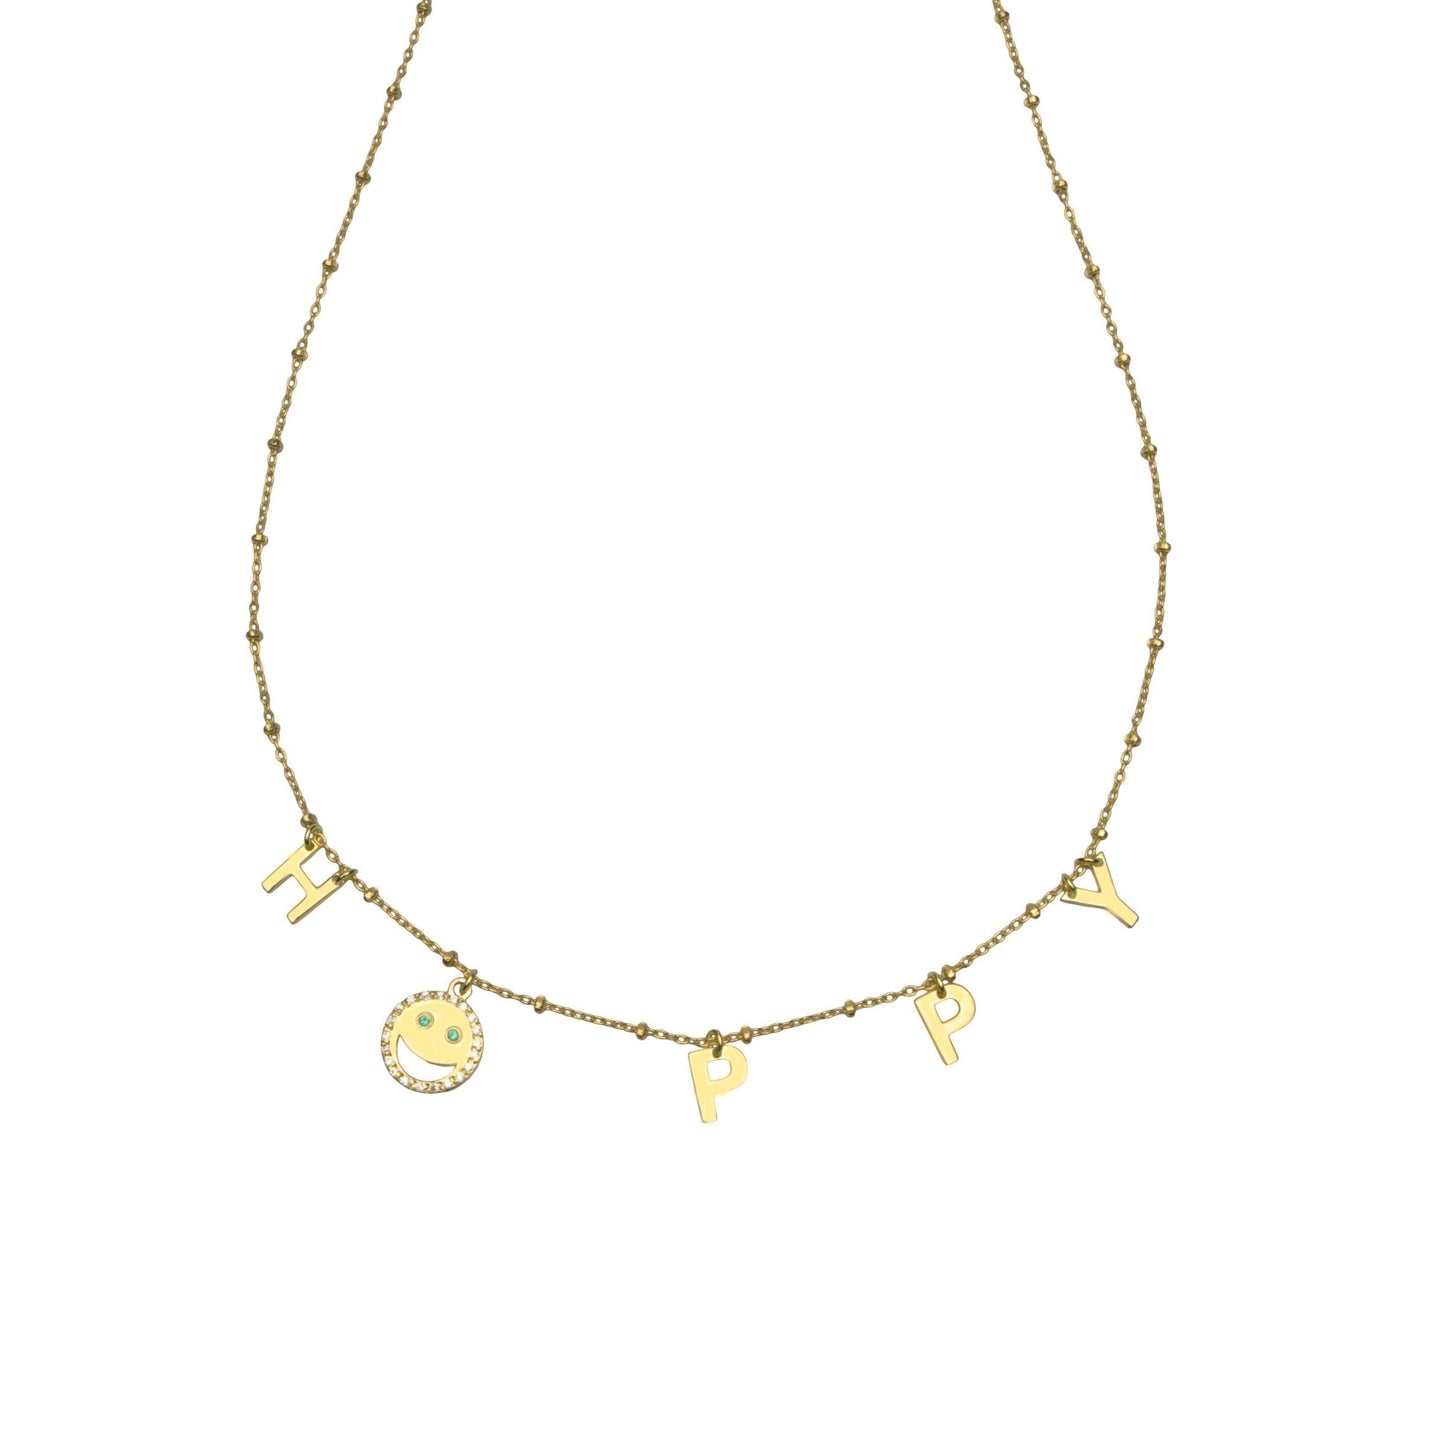 Happy Necklace - Gold Plated